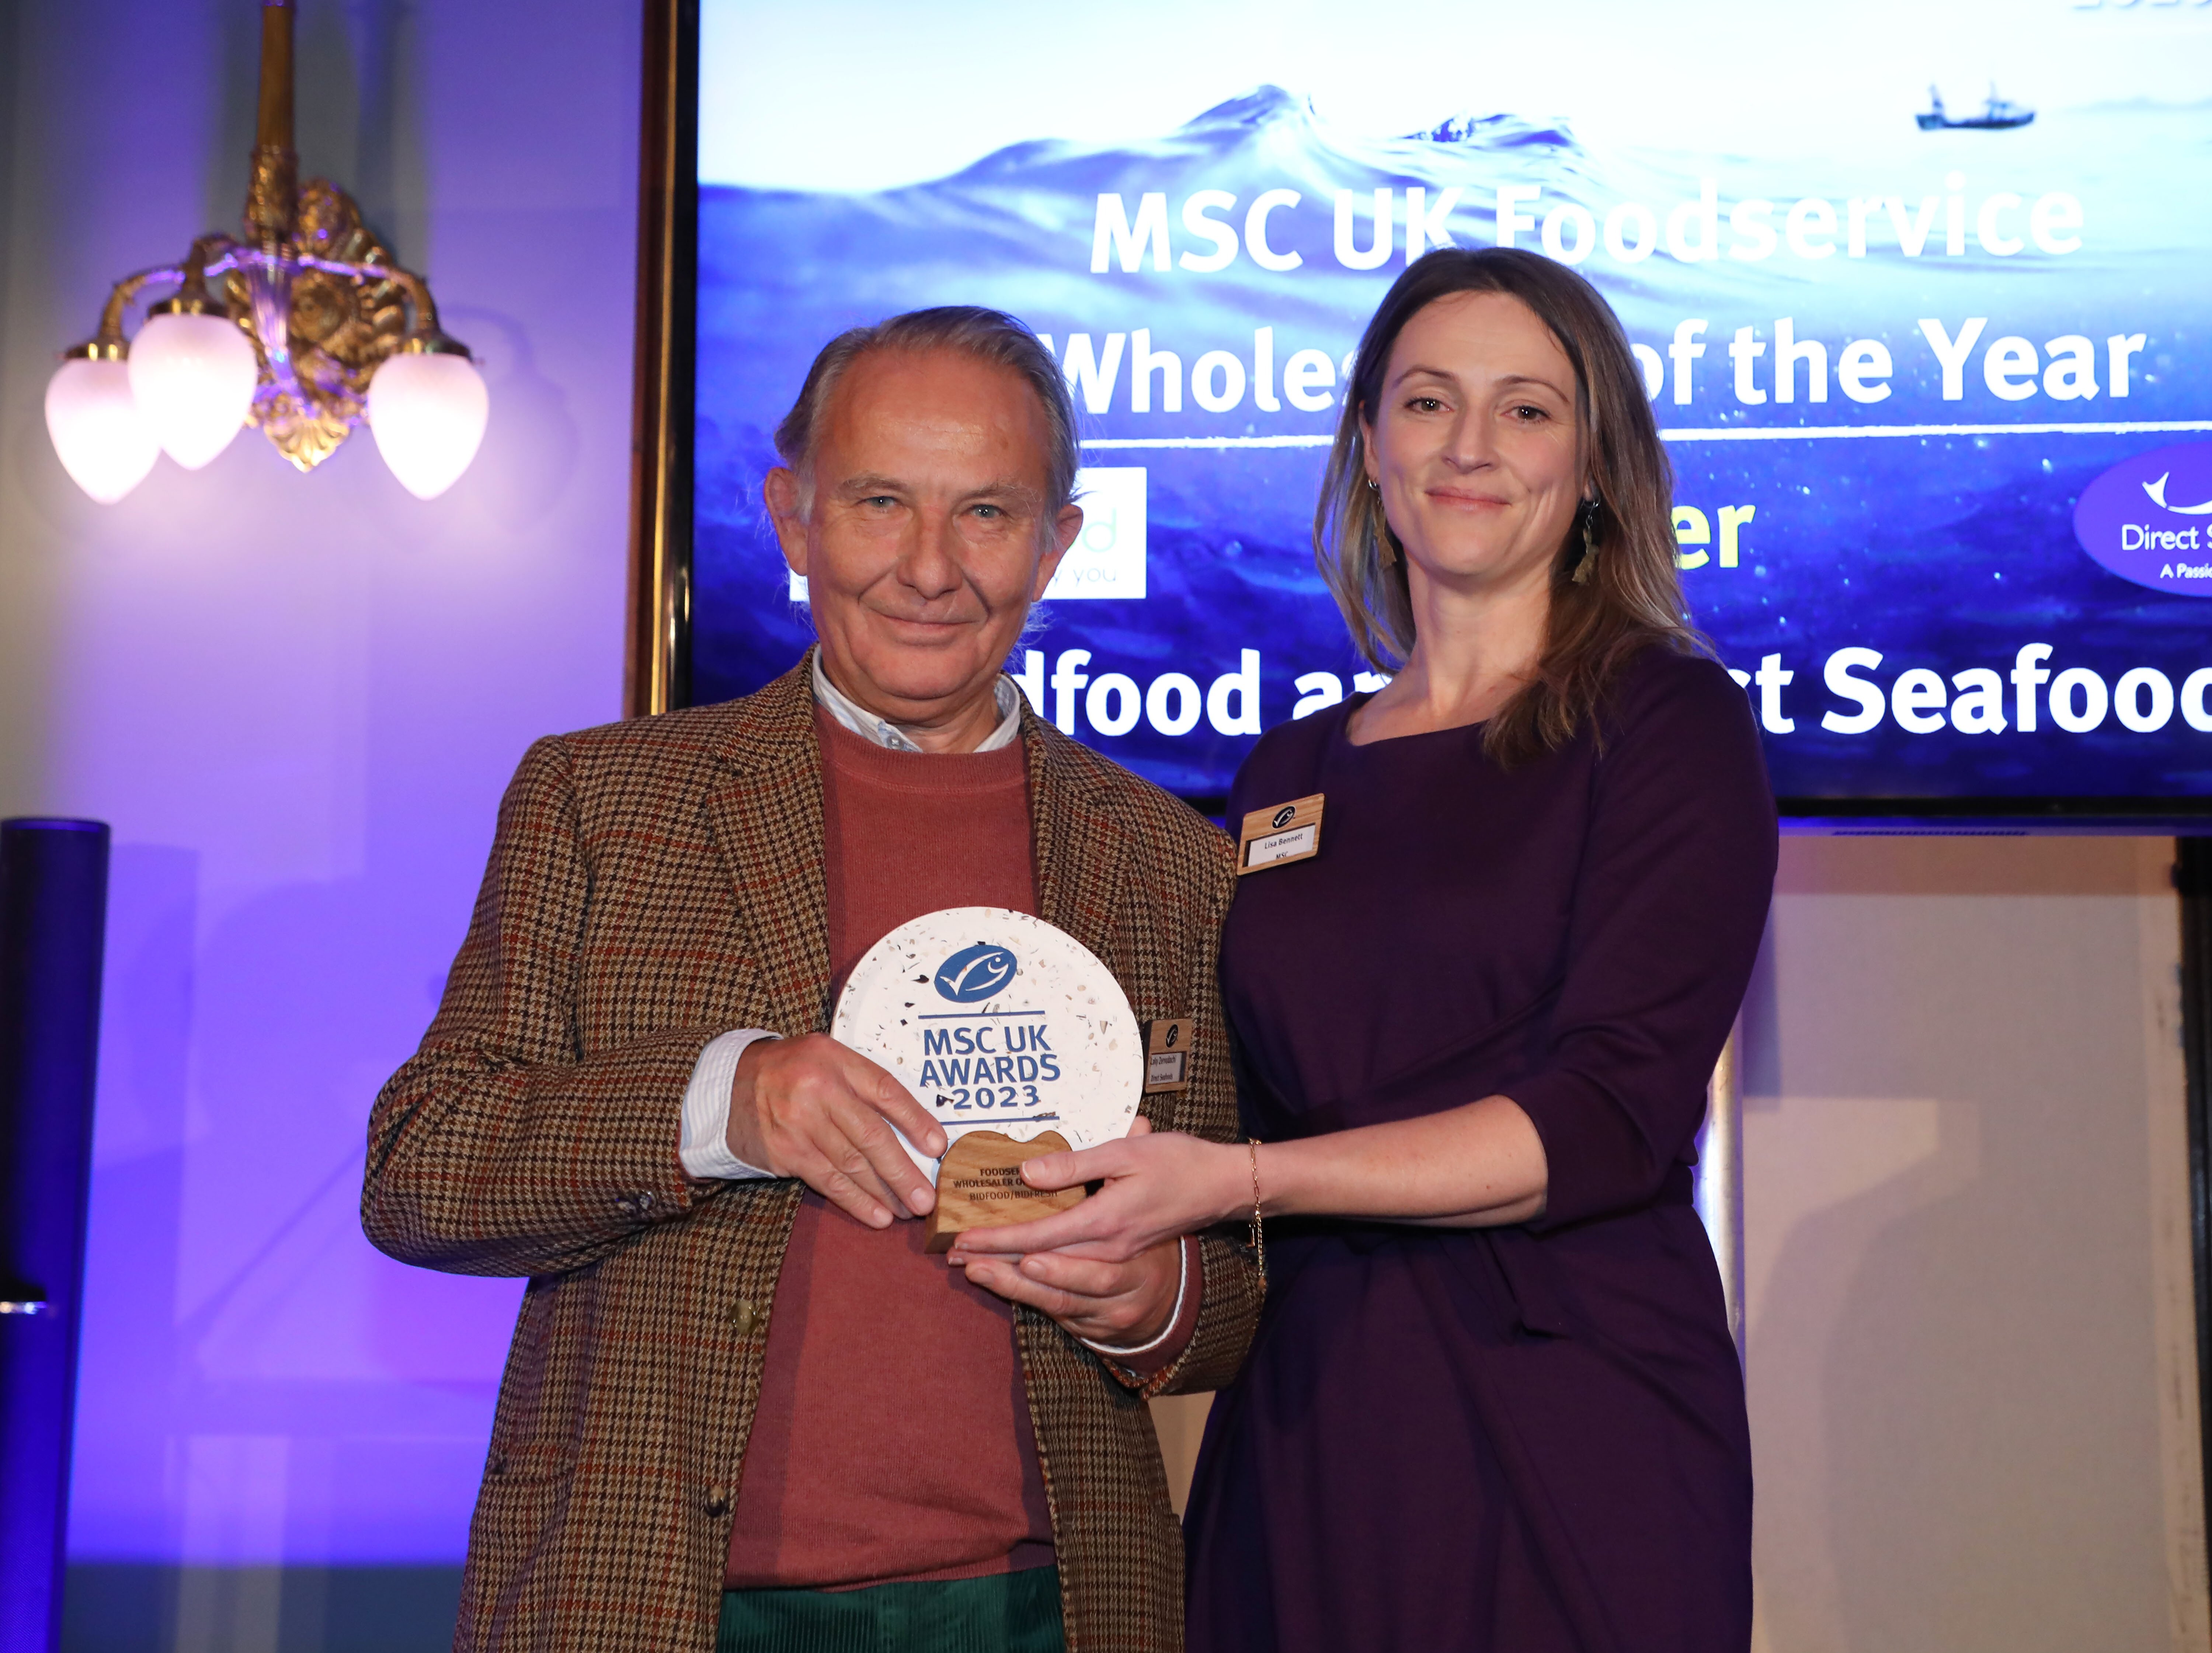 Bidfood and Direct Seafood scoop wins at MSC UK Awards 2023